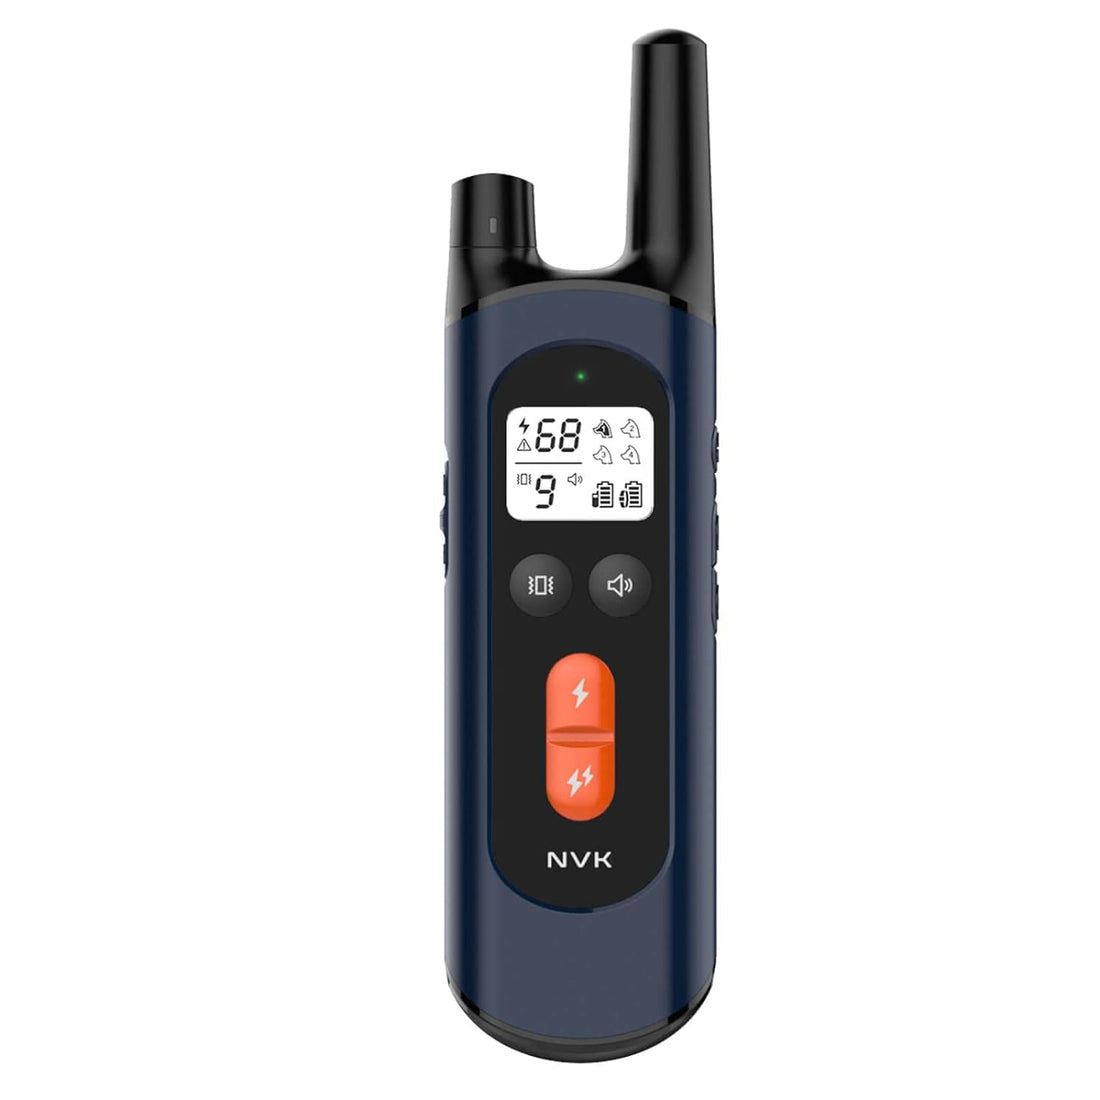 NVK Dog Training Remote, Single Multifunction Remote Without Collar for Small Medium Large Dogs